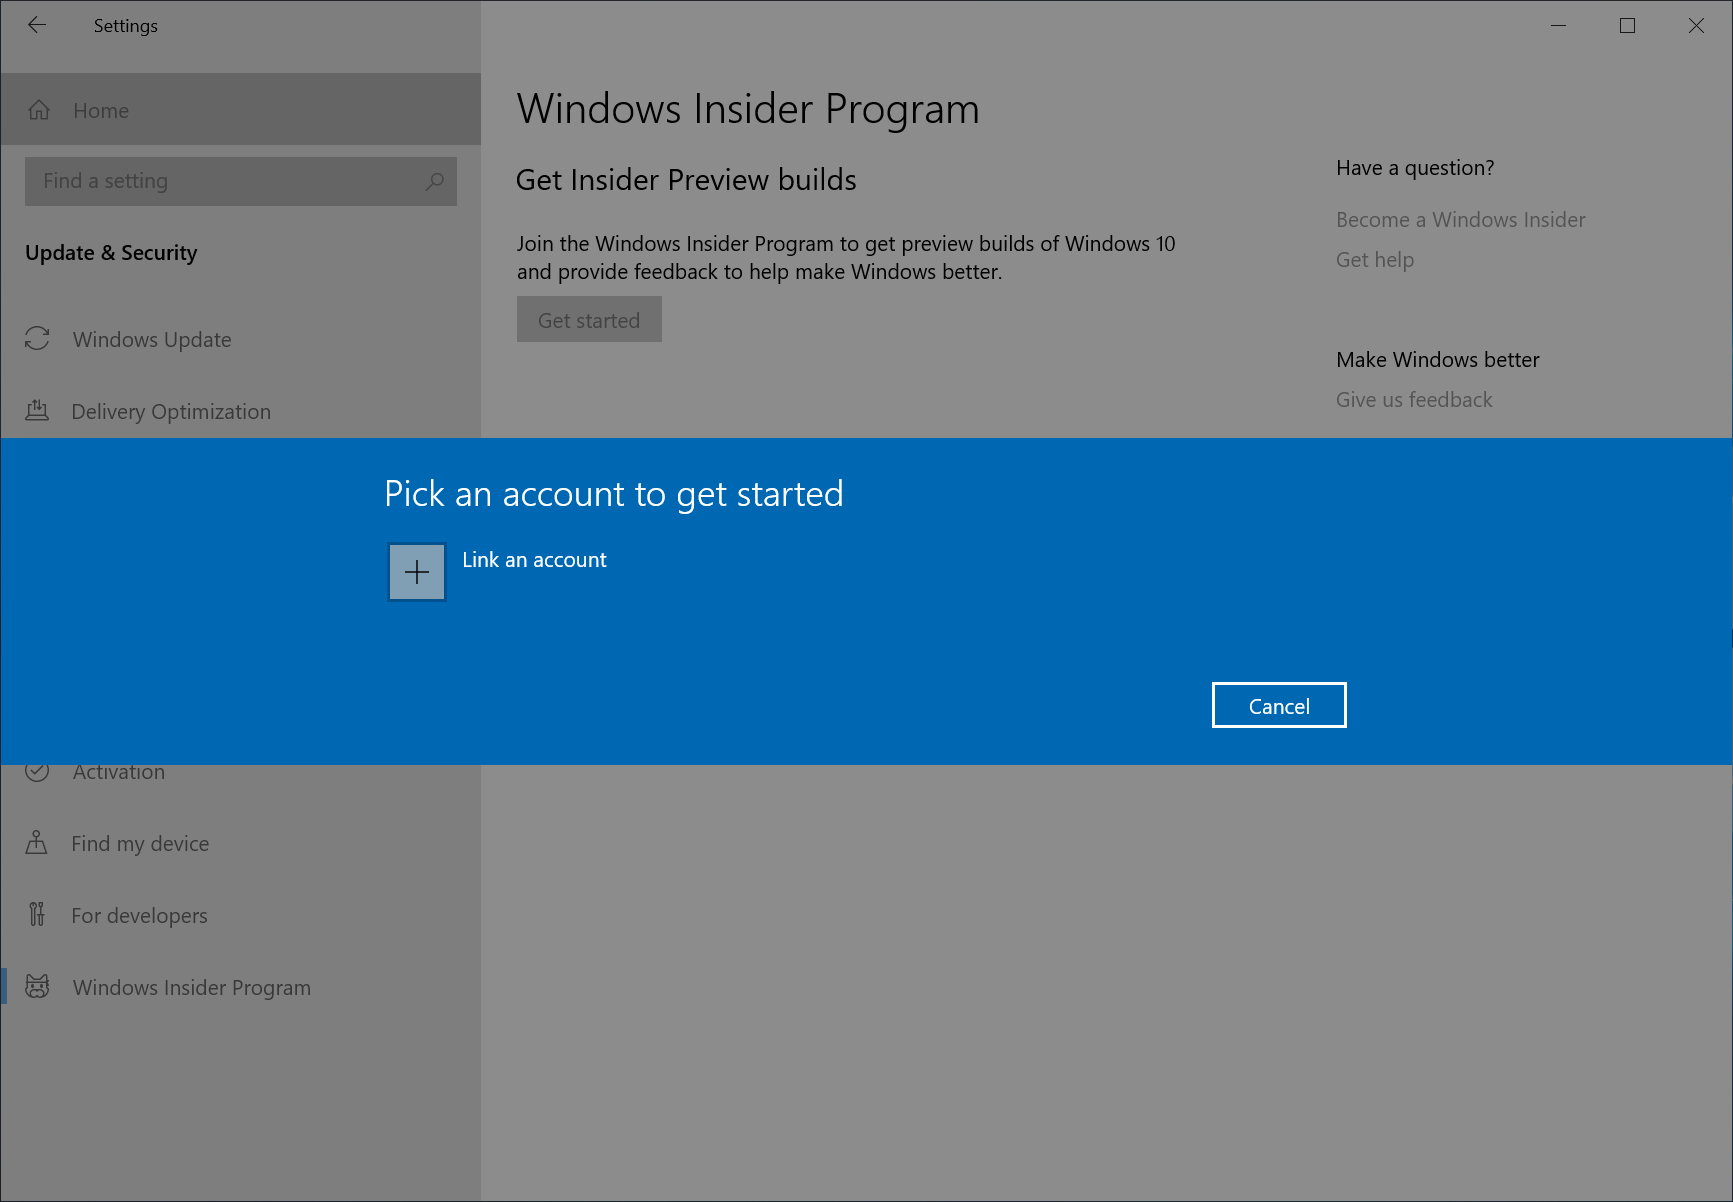 Step 2: Link your Microsoft account or Azure Active Directory account. This is the email account you used to register for the Windows Insider Program.